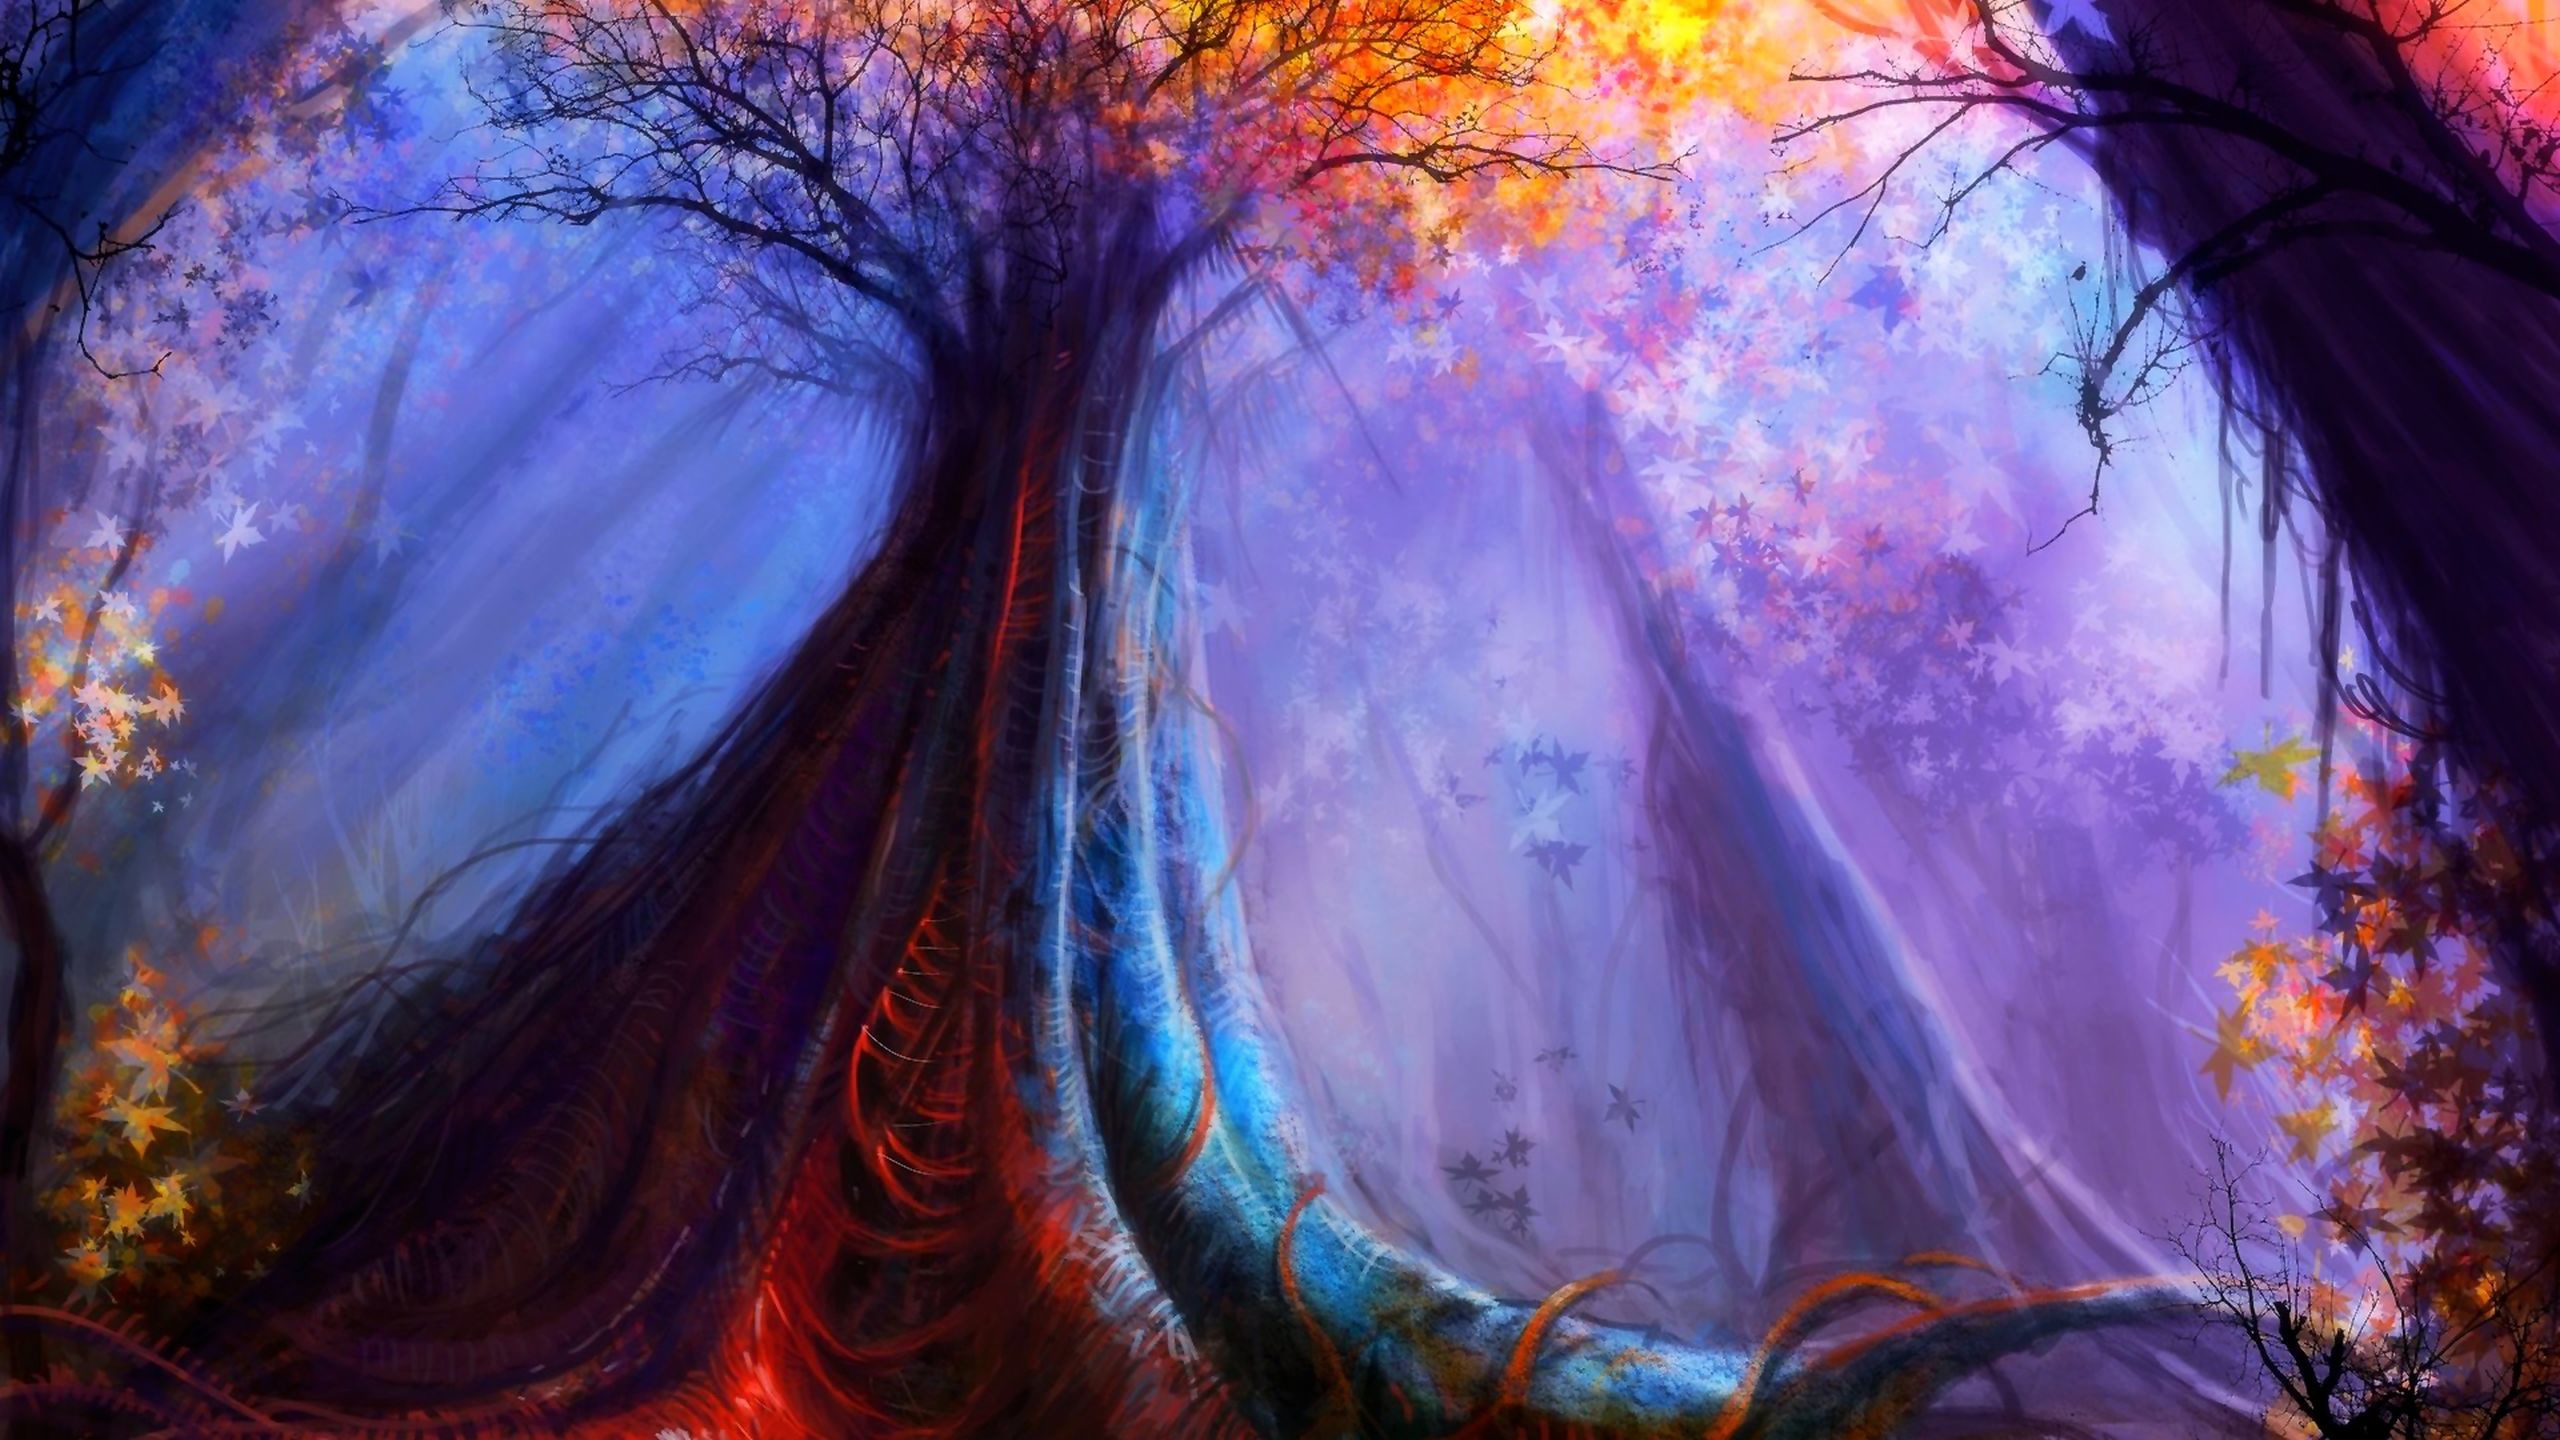 2560x1440 Enchanted, Forest, Wide, Hd, Wallpaper, Free, Beautiful, Desktop, Images,  Amazing Artworks, High Resolution, Colorful, 2560Ã1440 Wallpaper HD